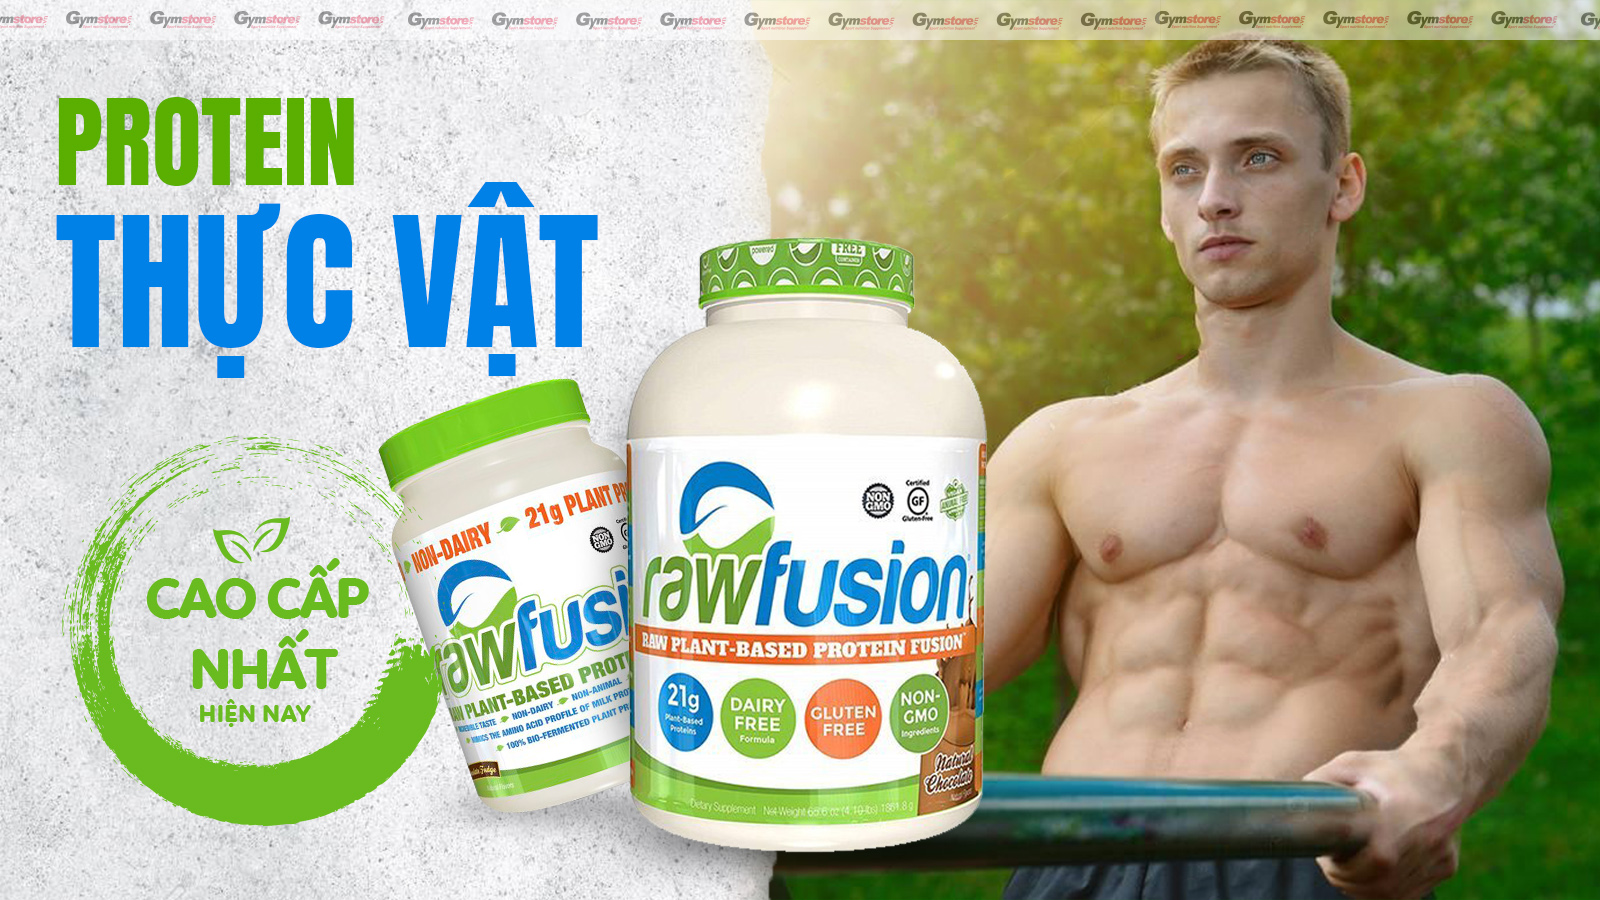 Raw-Fusion-4lbs-Protein-thuc-vat-tot-nhat-gymstore